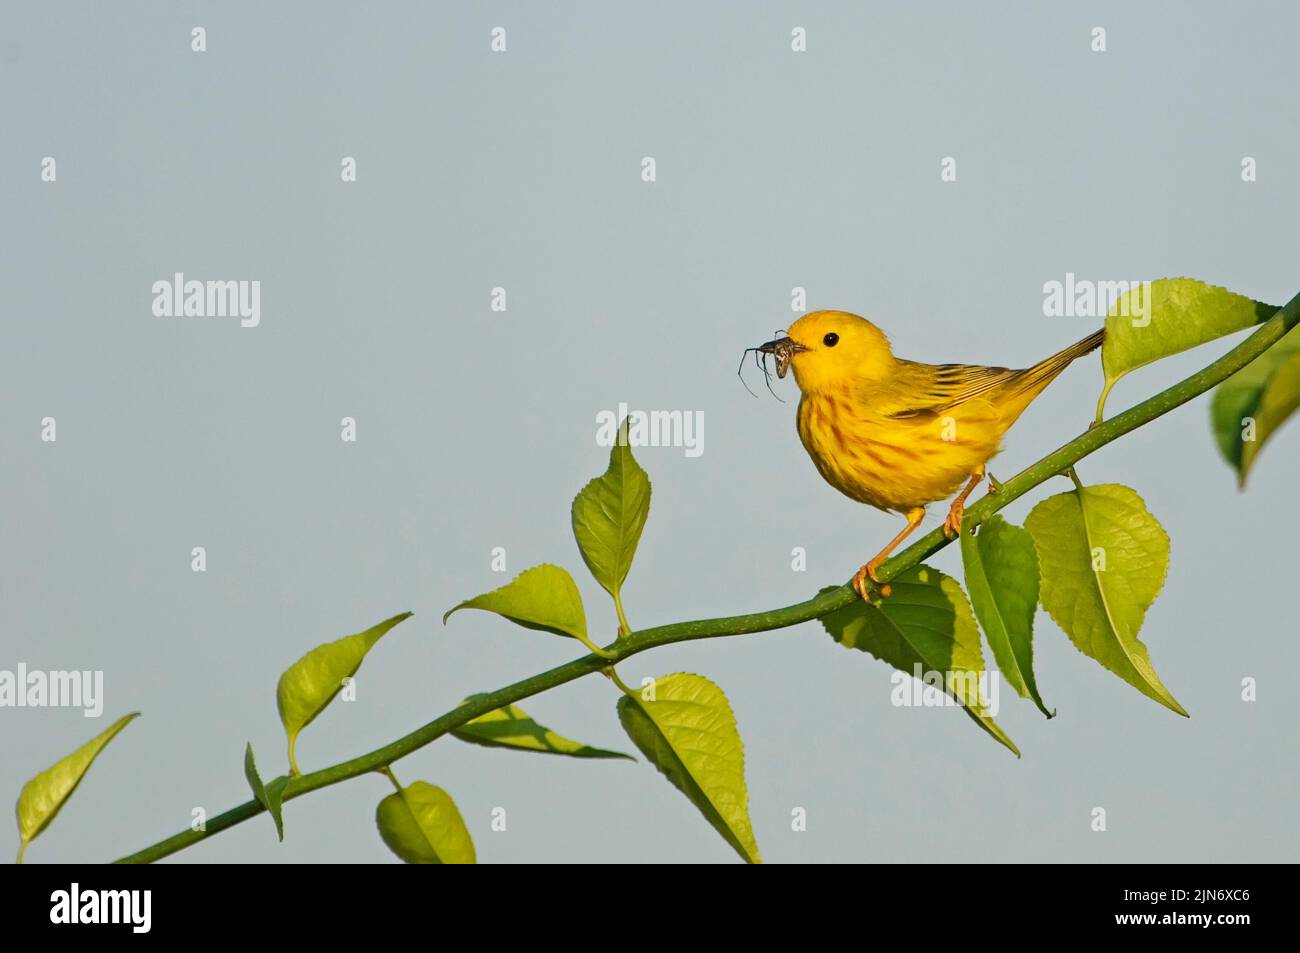 Adult male Yellow warbler with insect prey Stock Photo